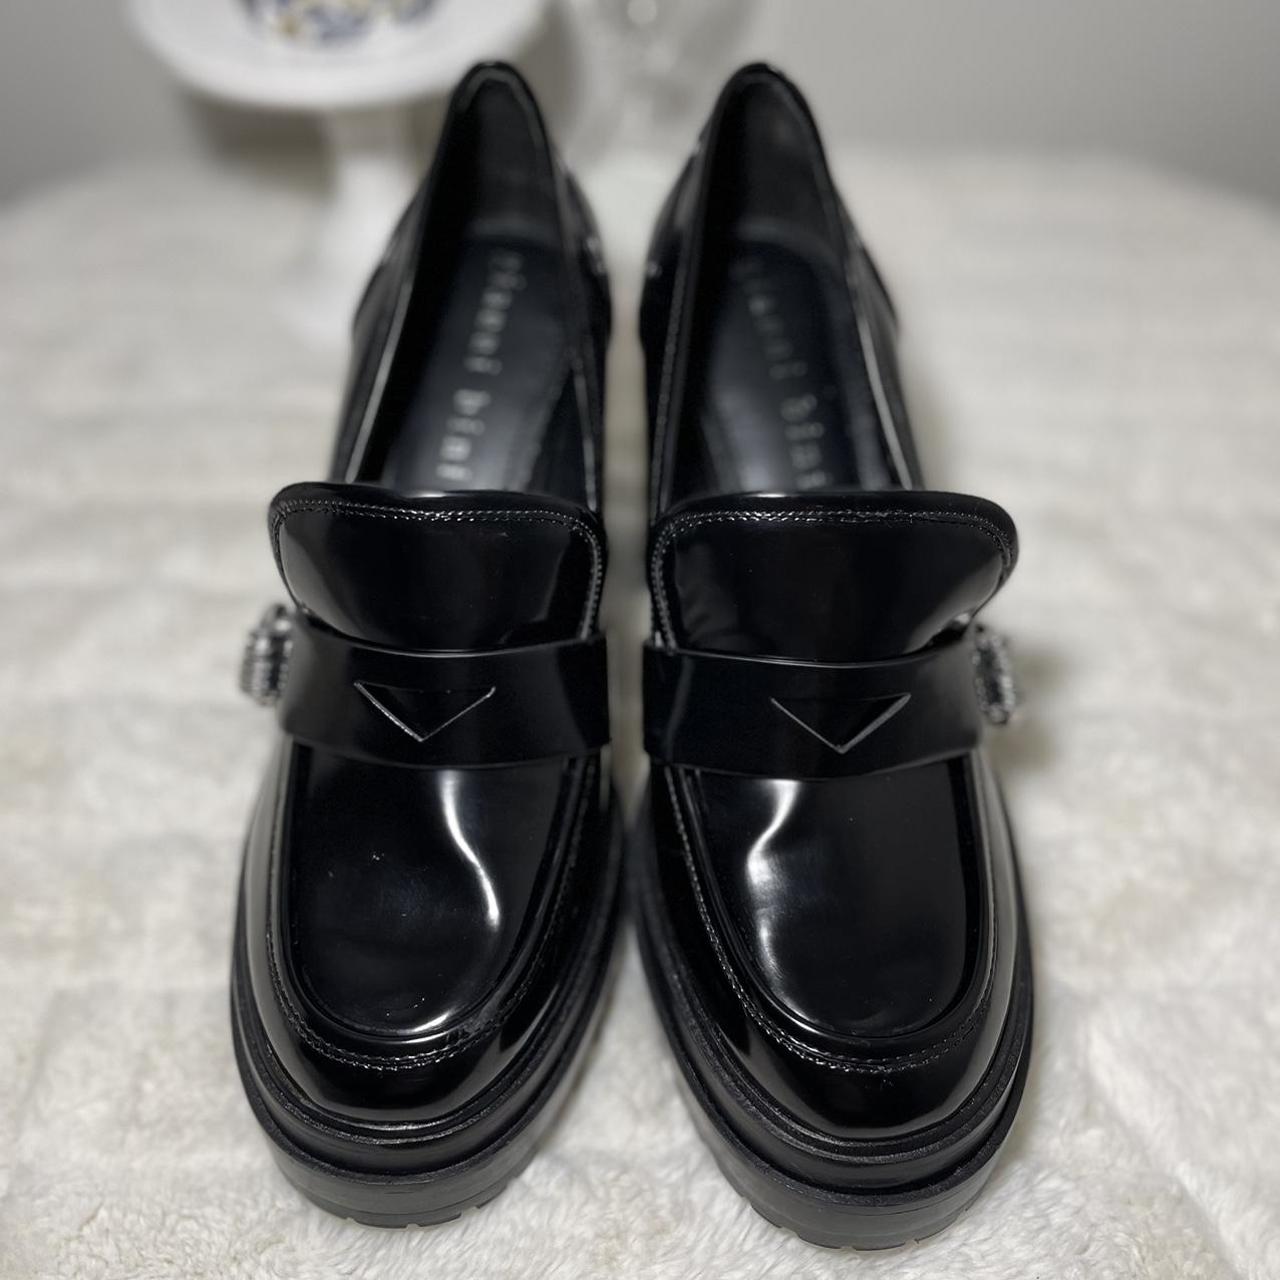 Gianni Bini Women's Black and Silver Loafers | Depop